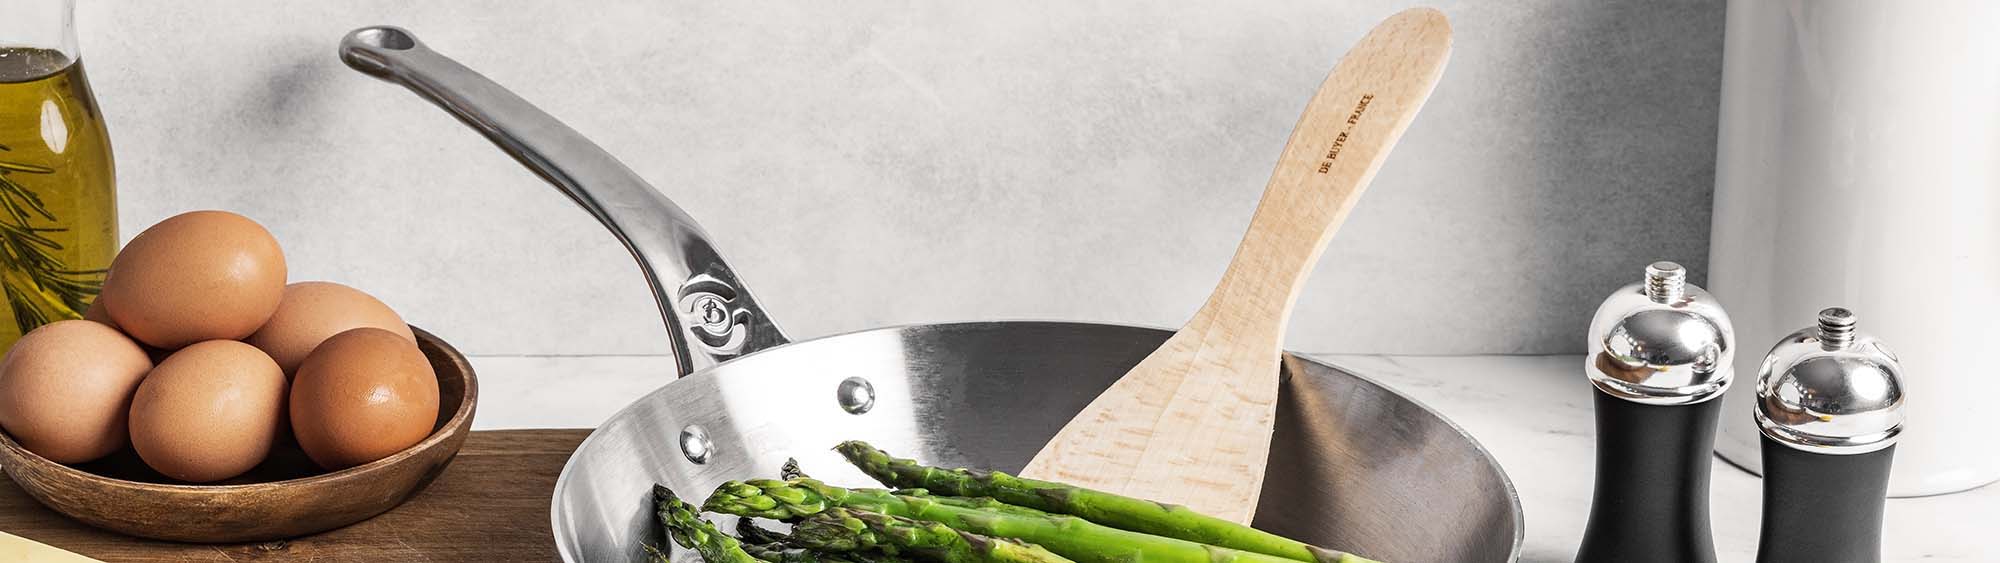 AFFINITY Stainless Steel Cookware | de Buyer USA